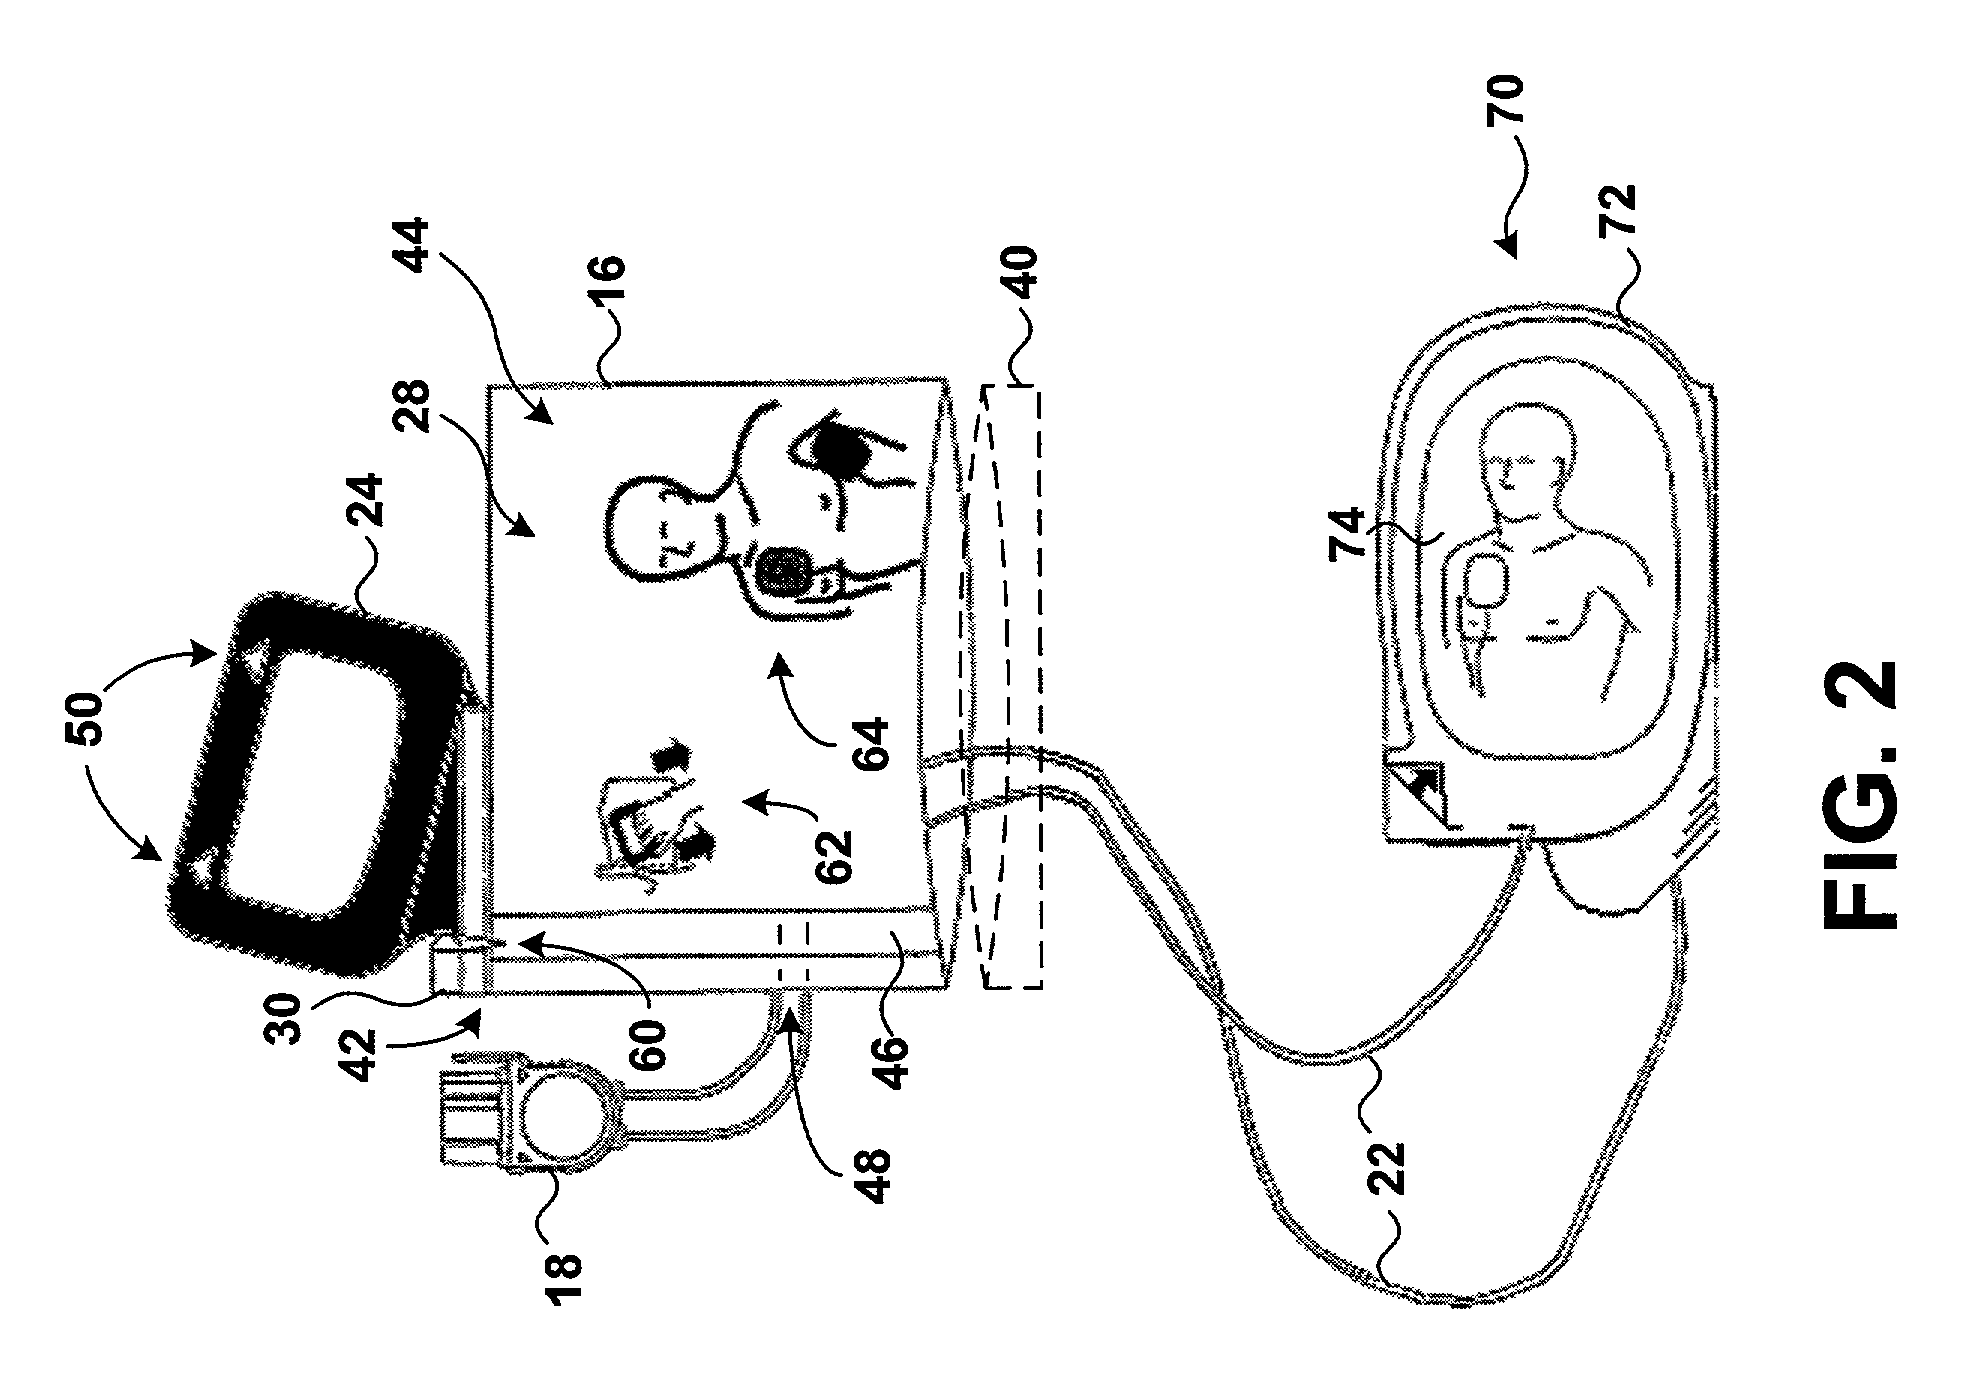 Easy-to-use electrode and package